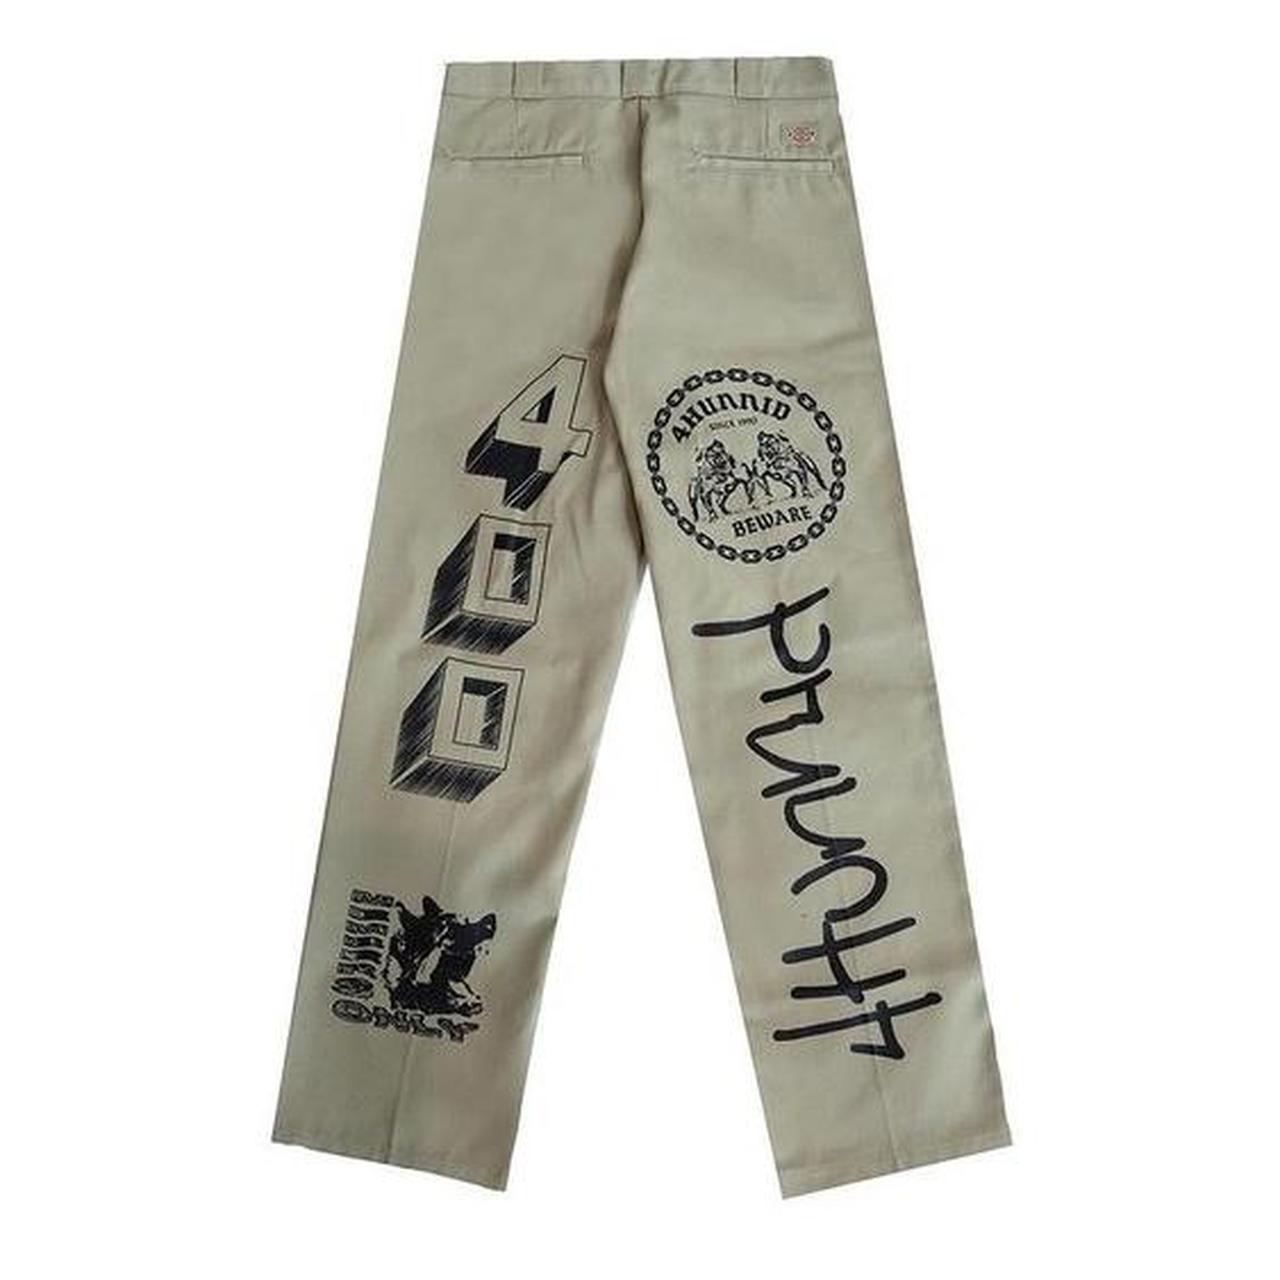 YG 4HUNNID HIT UP WORKPANTS DICKIES, Limited Edition